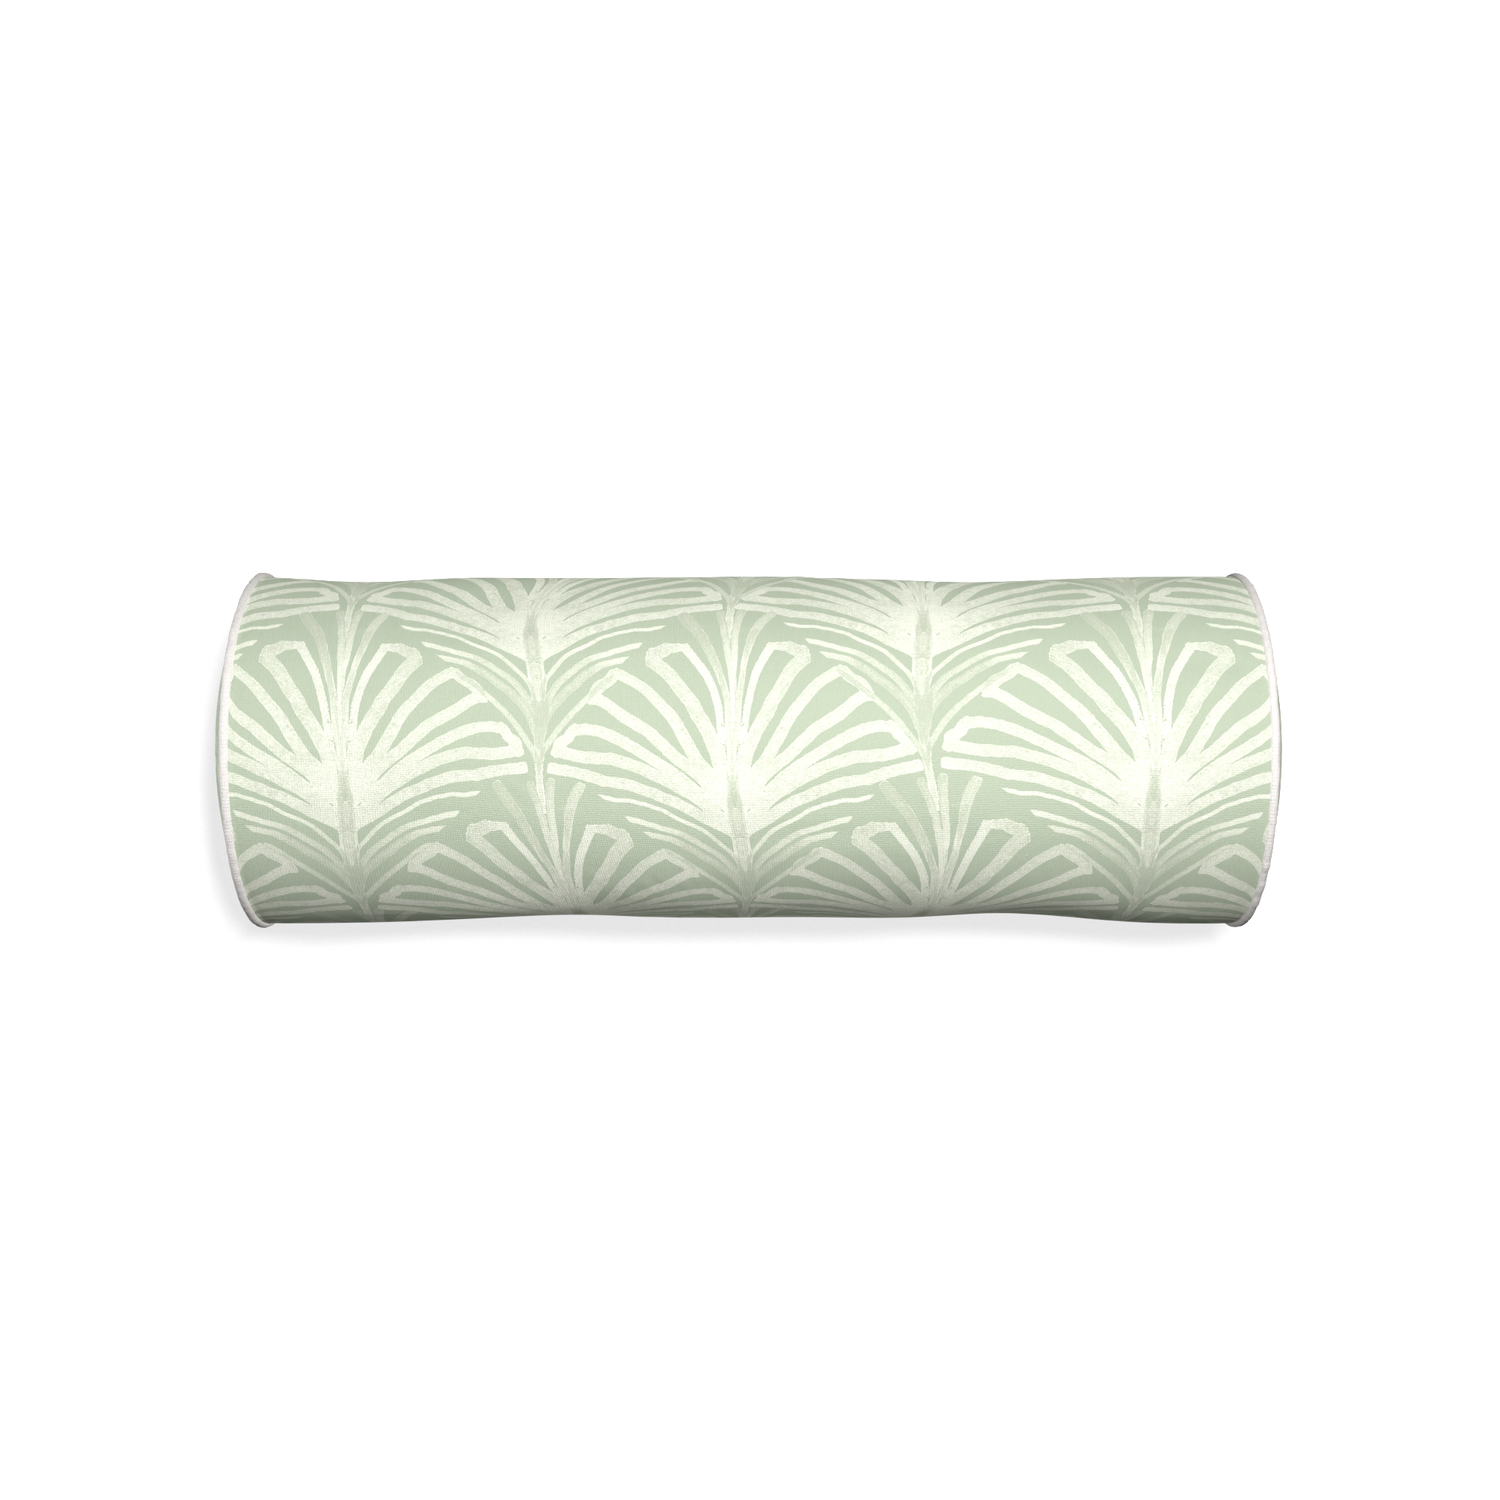 Bolster suzy sage custom sage green palmpillow with snow piping on white background